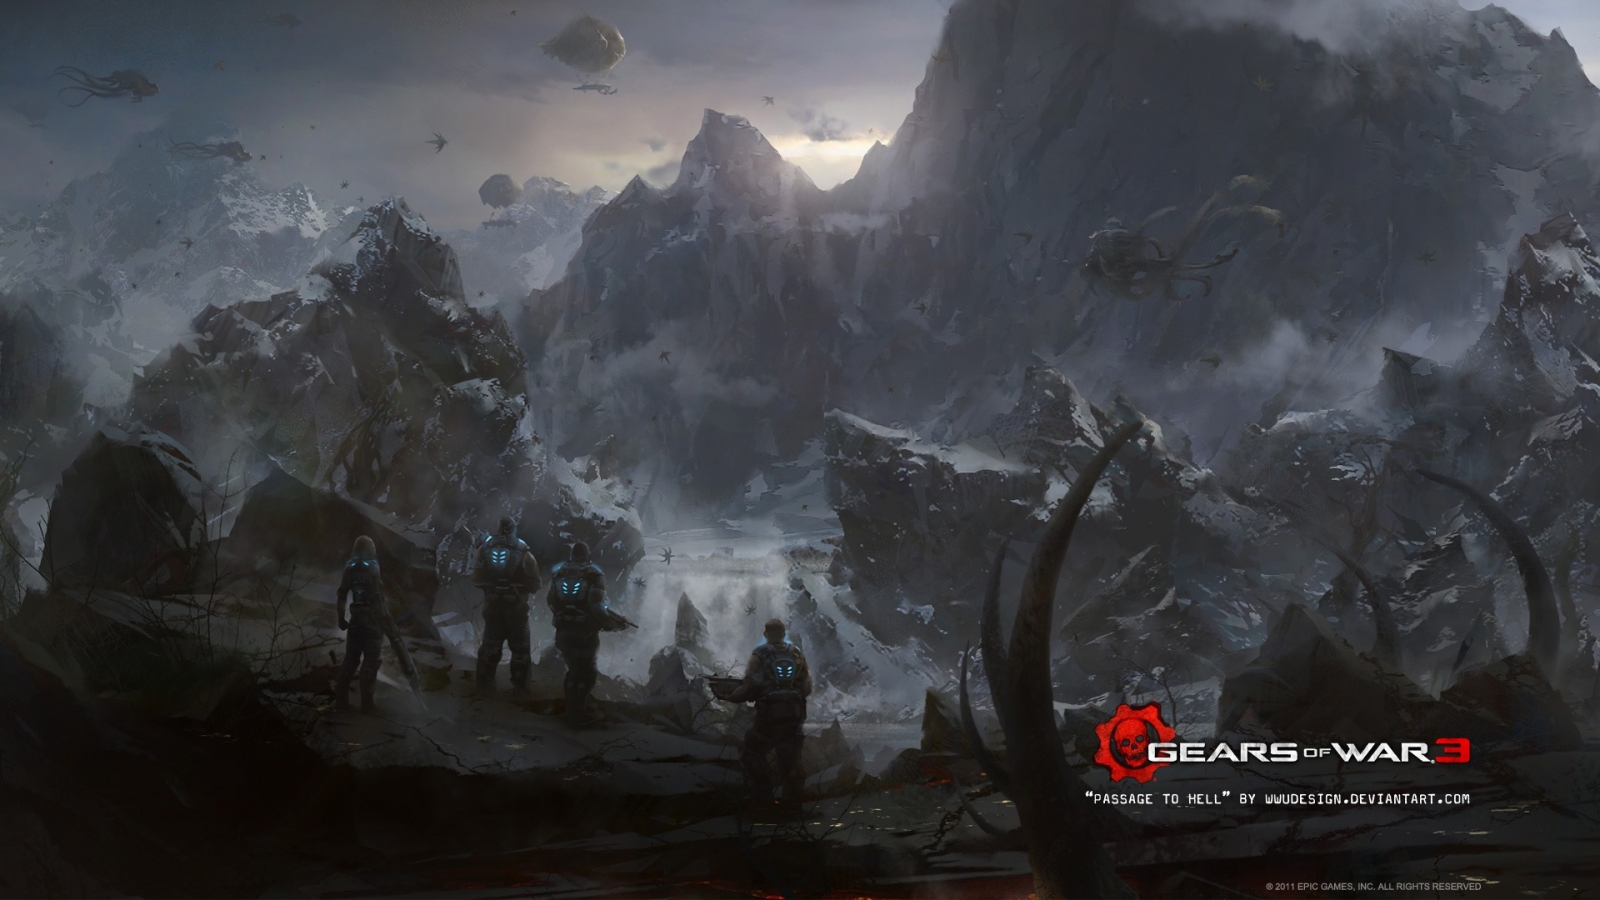 Wele To Our Gears Of War Feb Check Wallpaper Carmine